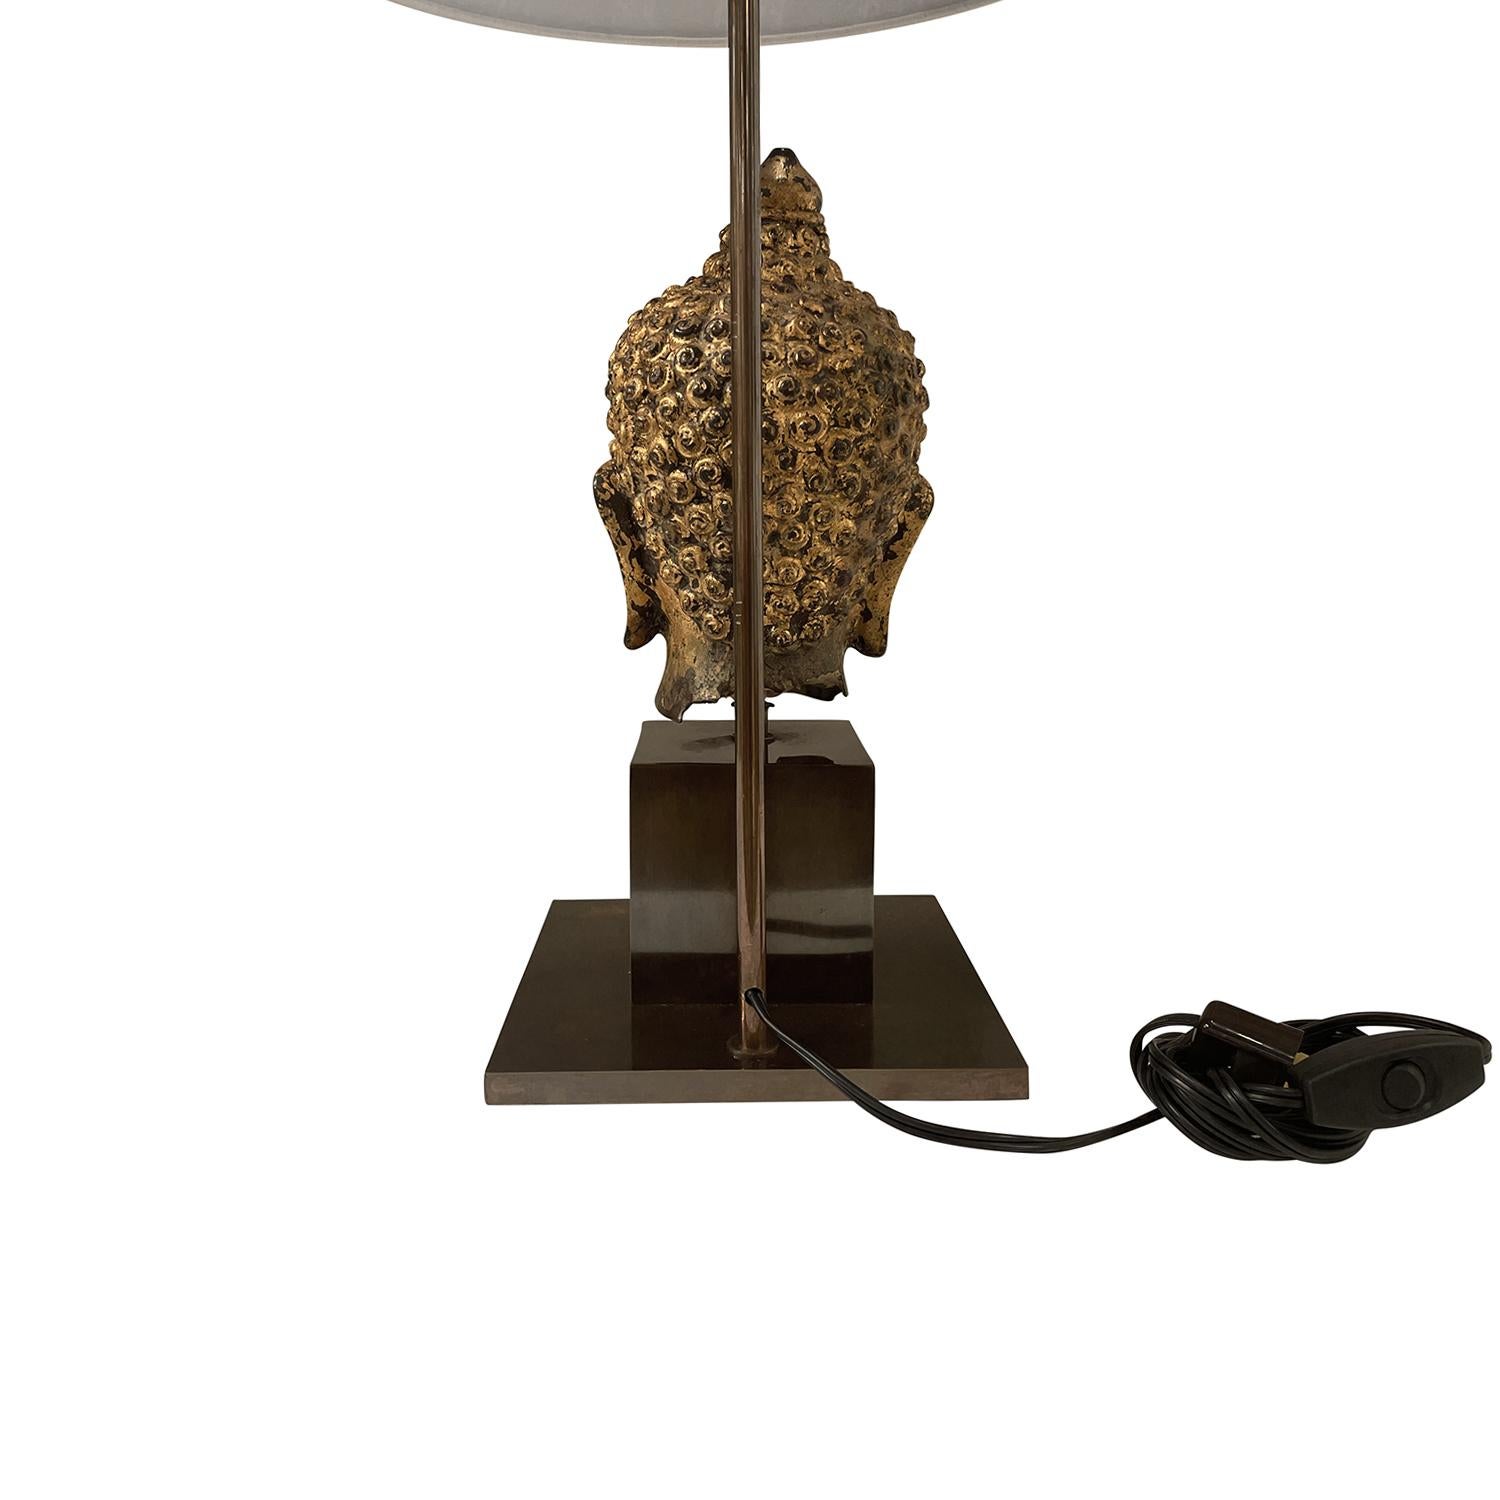 20th Century Gold Asian Metal Buddha Table Lamp, Vintage Wood Light For Sale 4